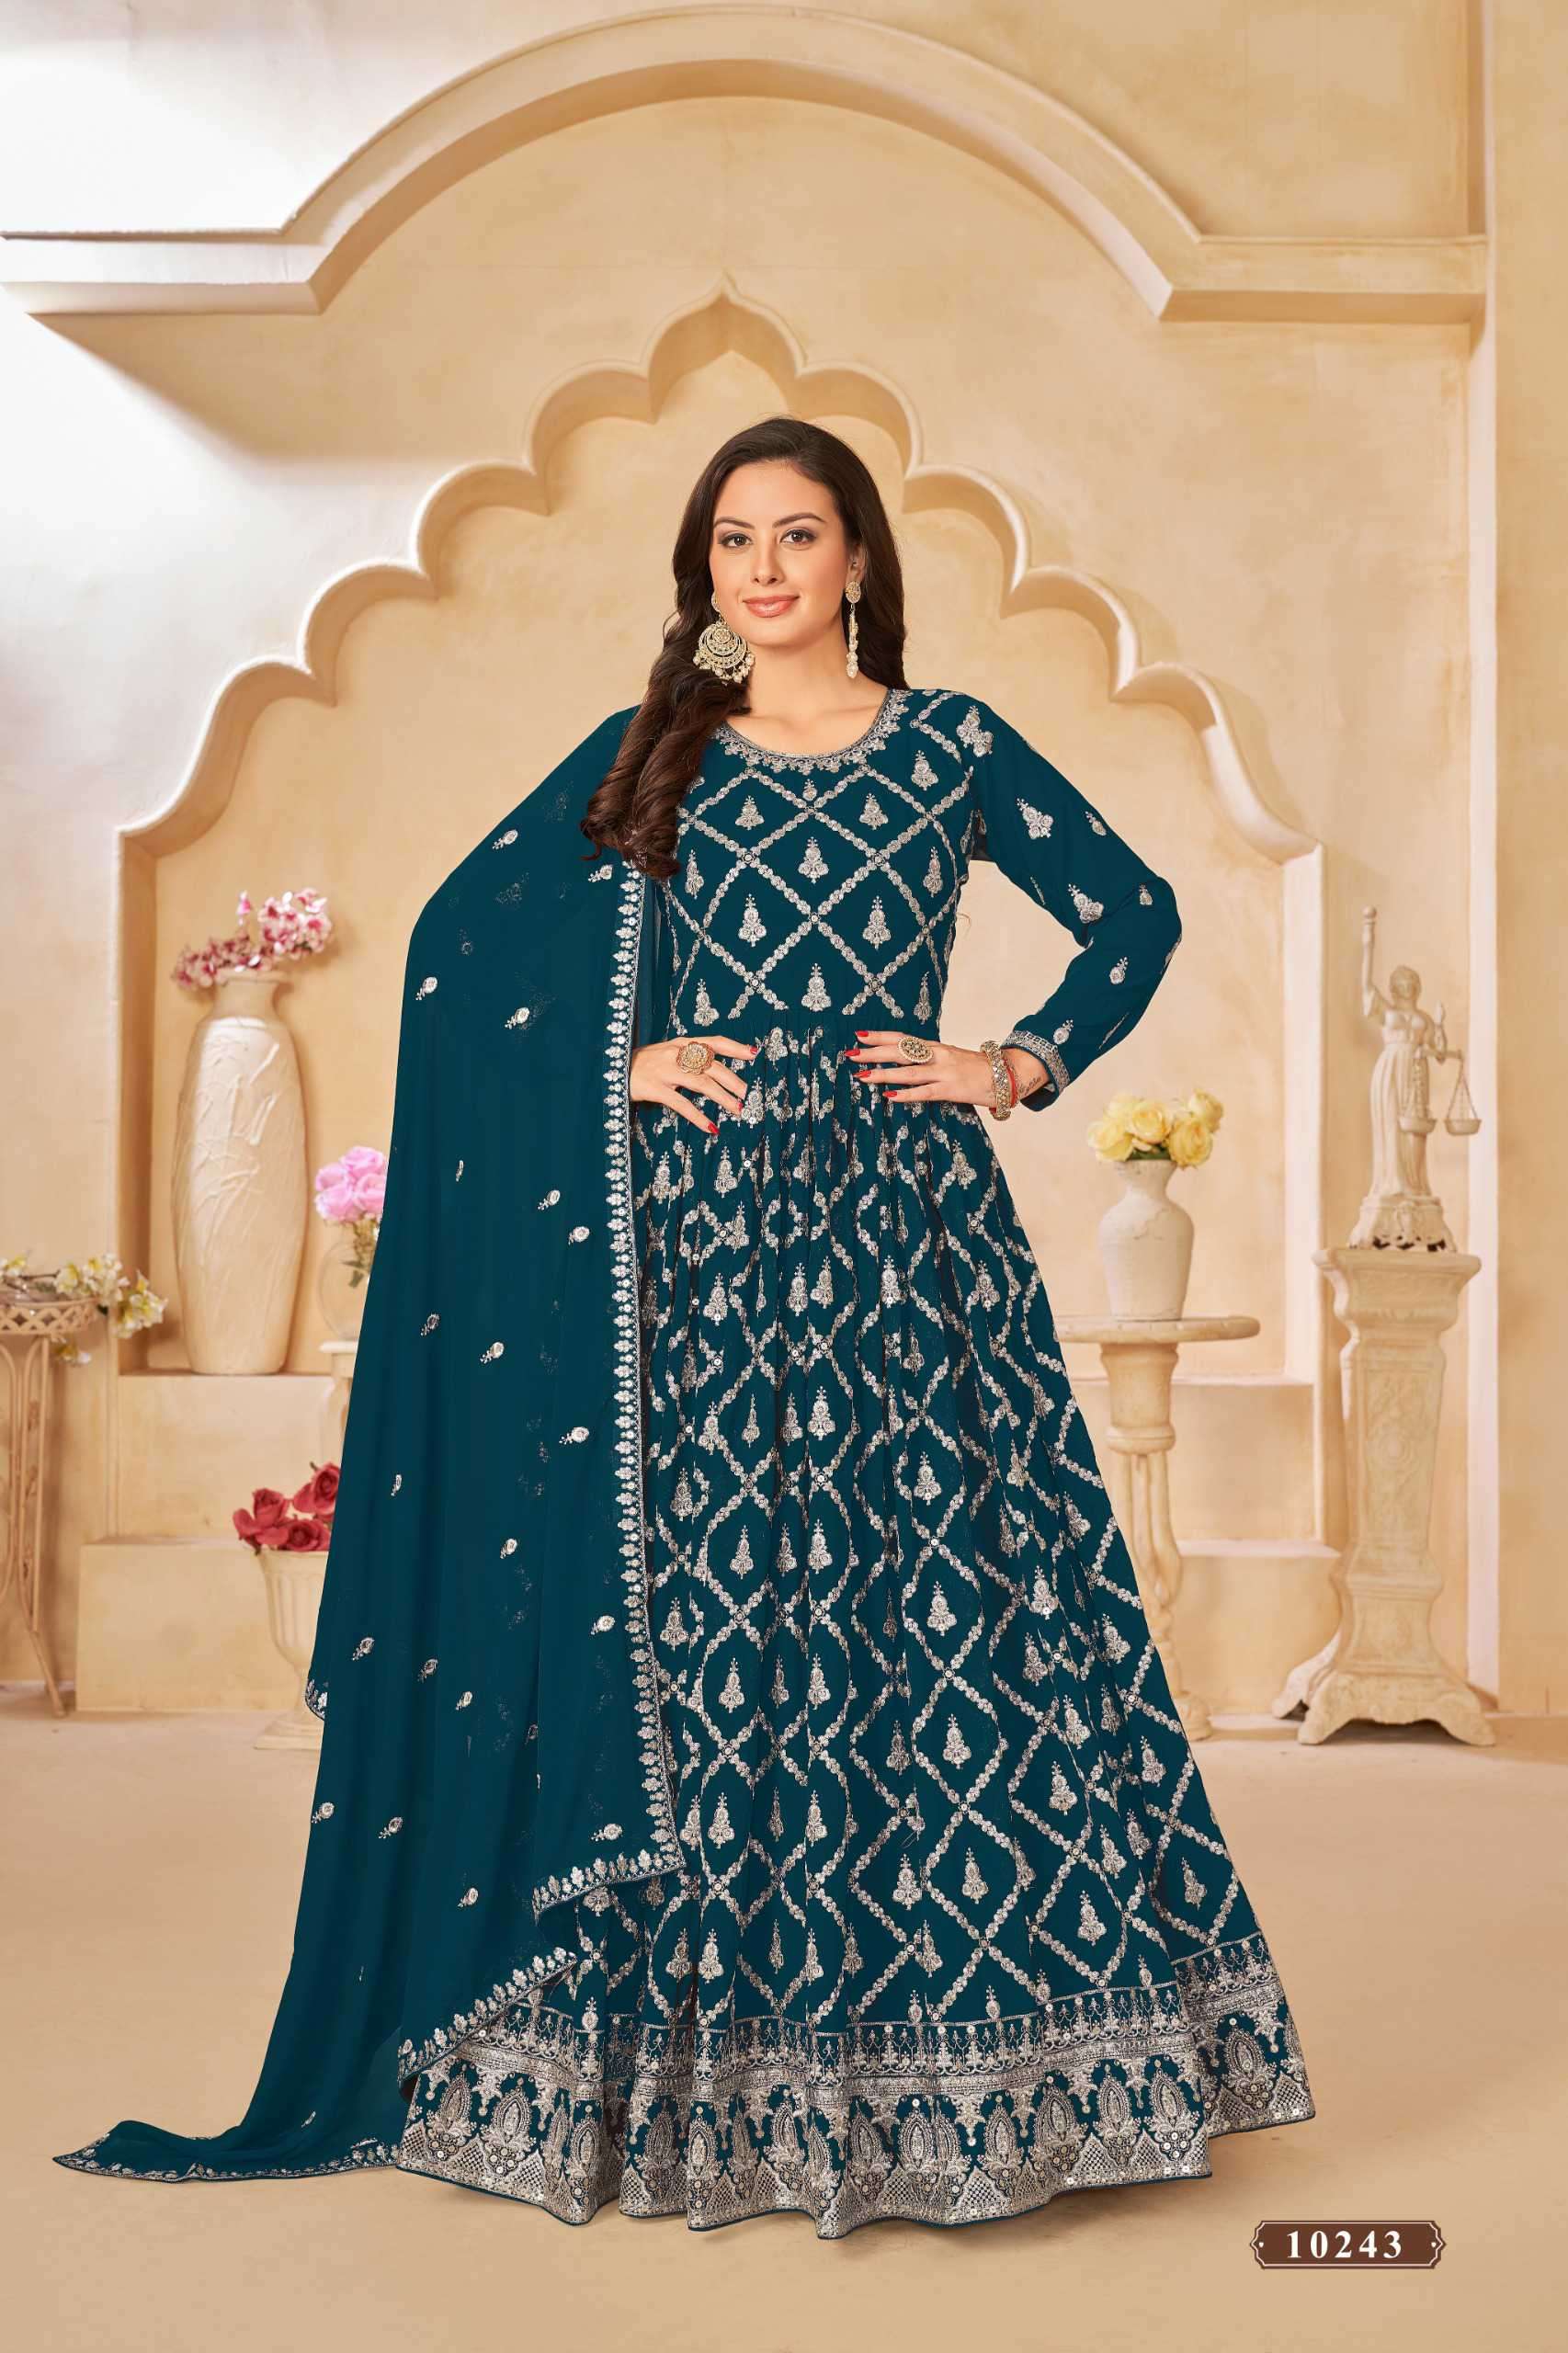 Anjubaa Vol 24 Wedding Collection Anarkali Designs Suits New Collection